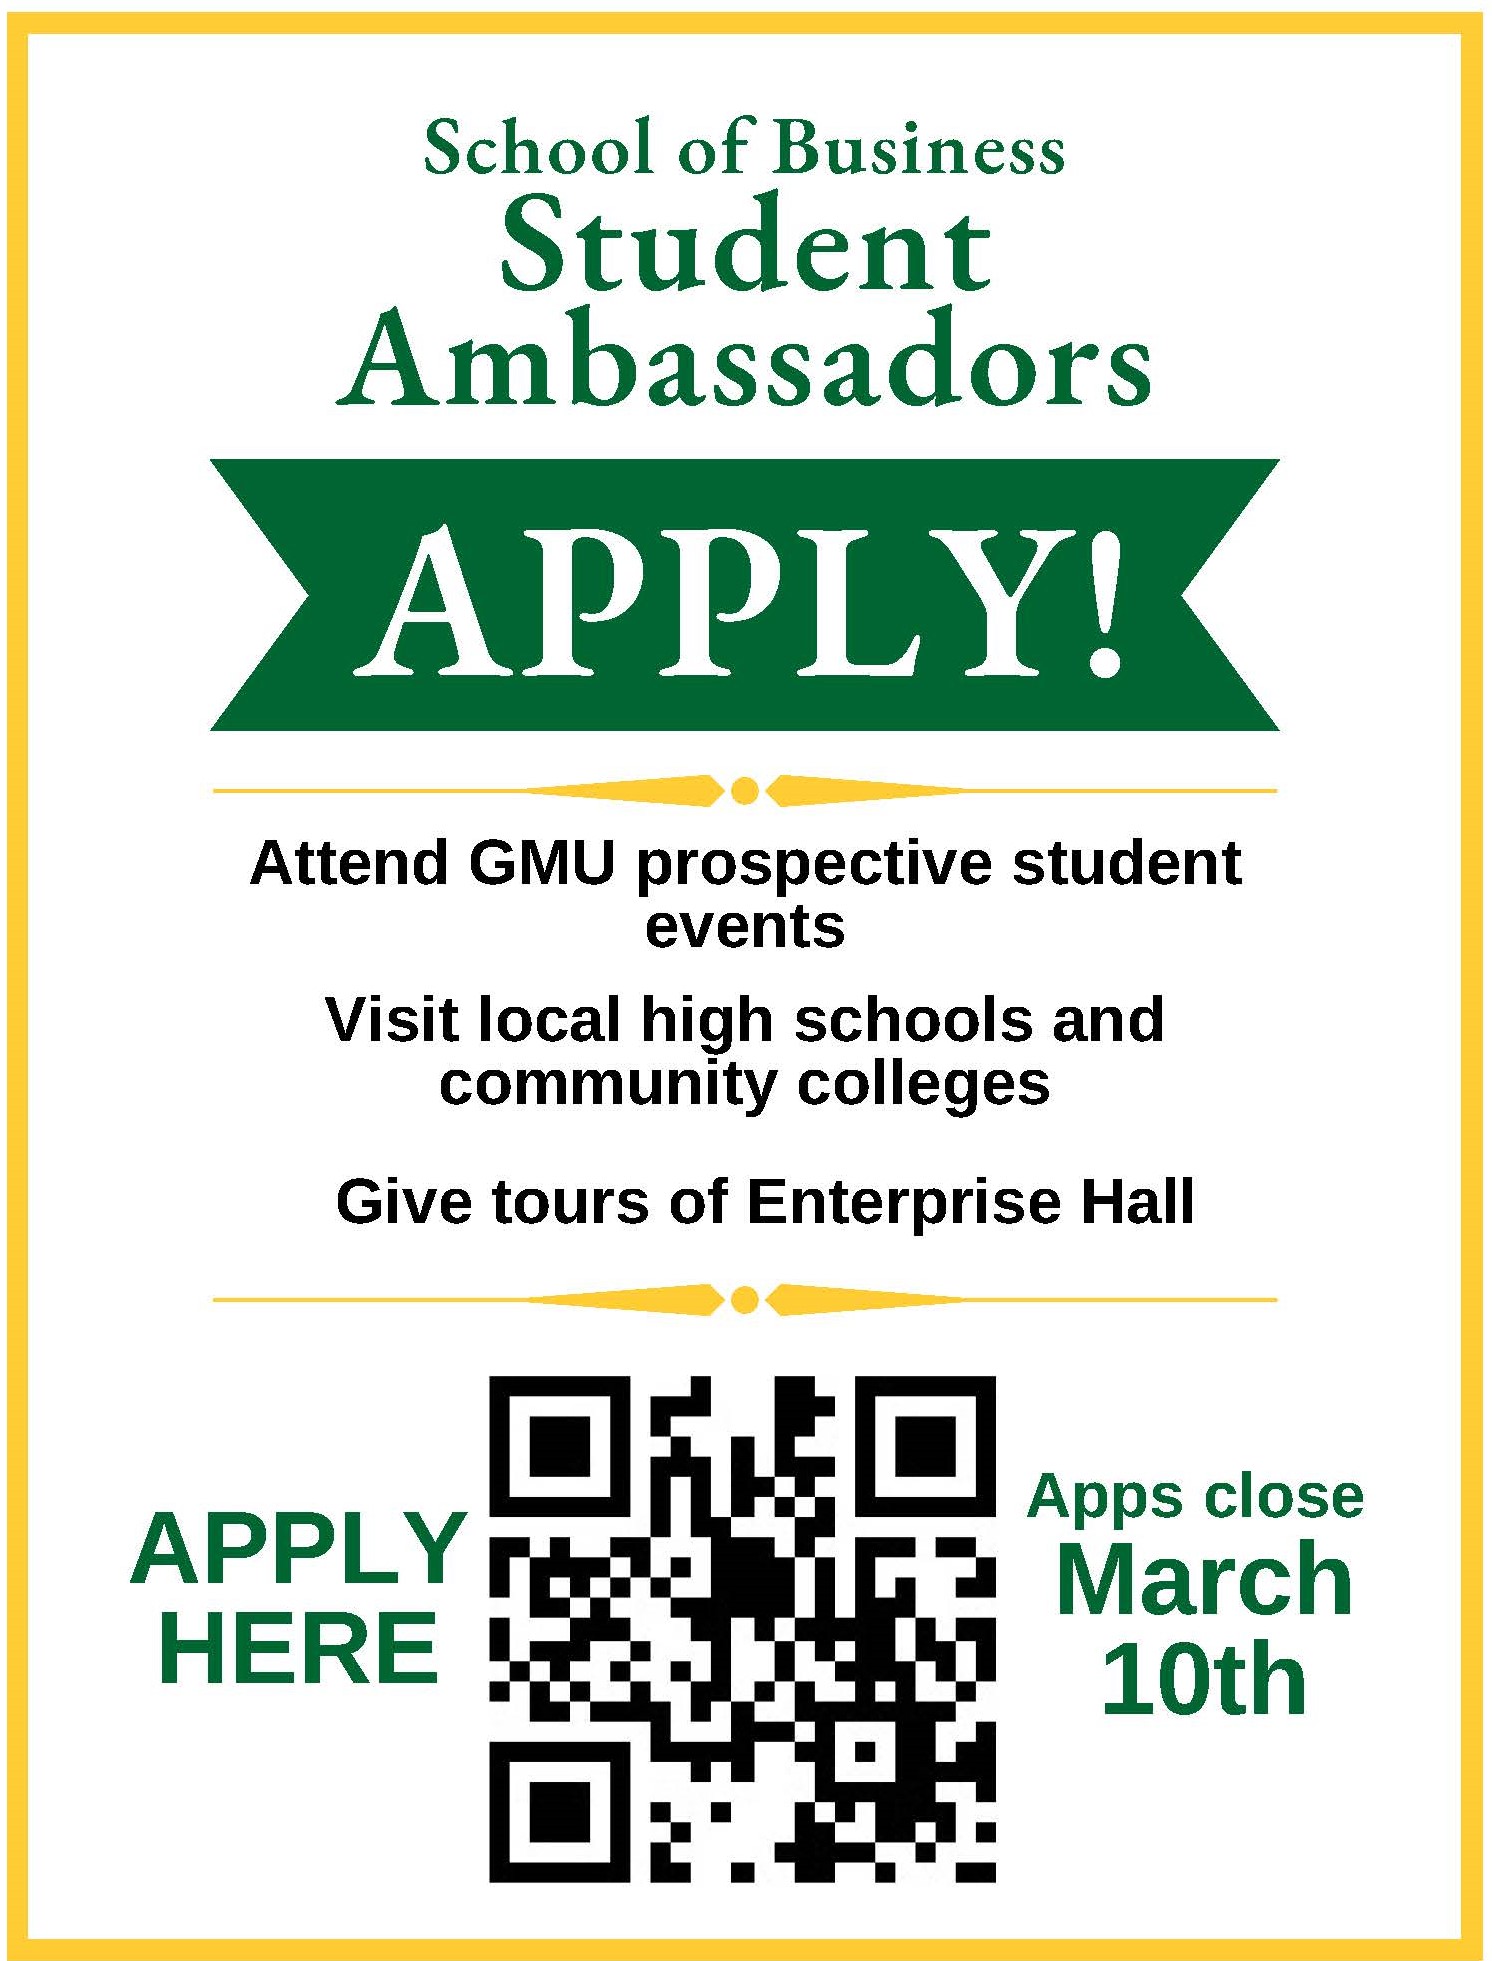 School of Business spring 2023 Student Ambassador application open.  Apply by March 10.  Work with the undergrad recruitment team, attend GMU prospective student events, and provide tours of Enterprise Hall to prospective students.